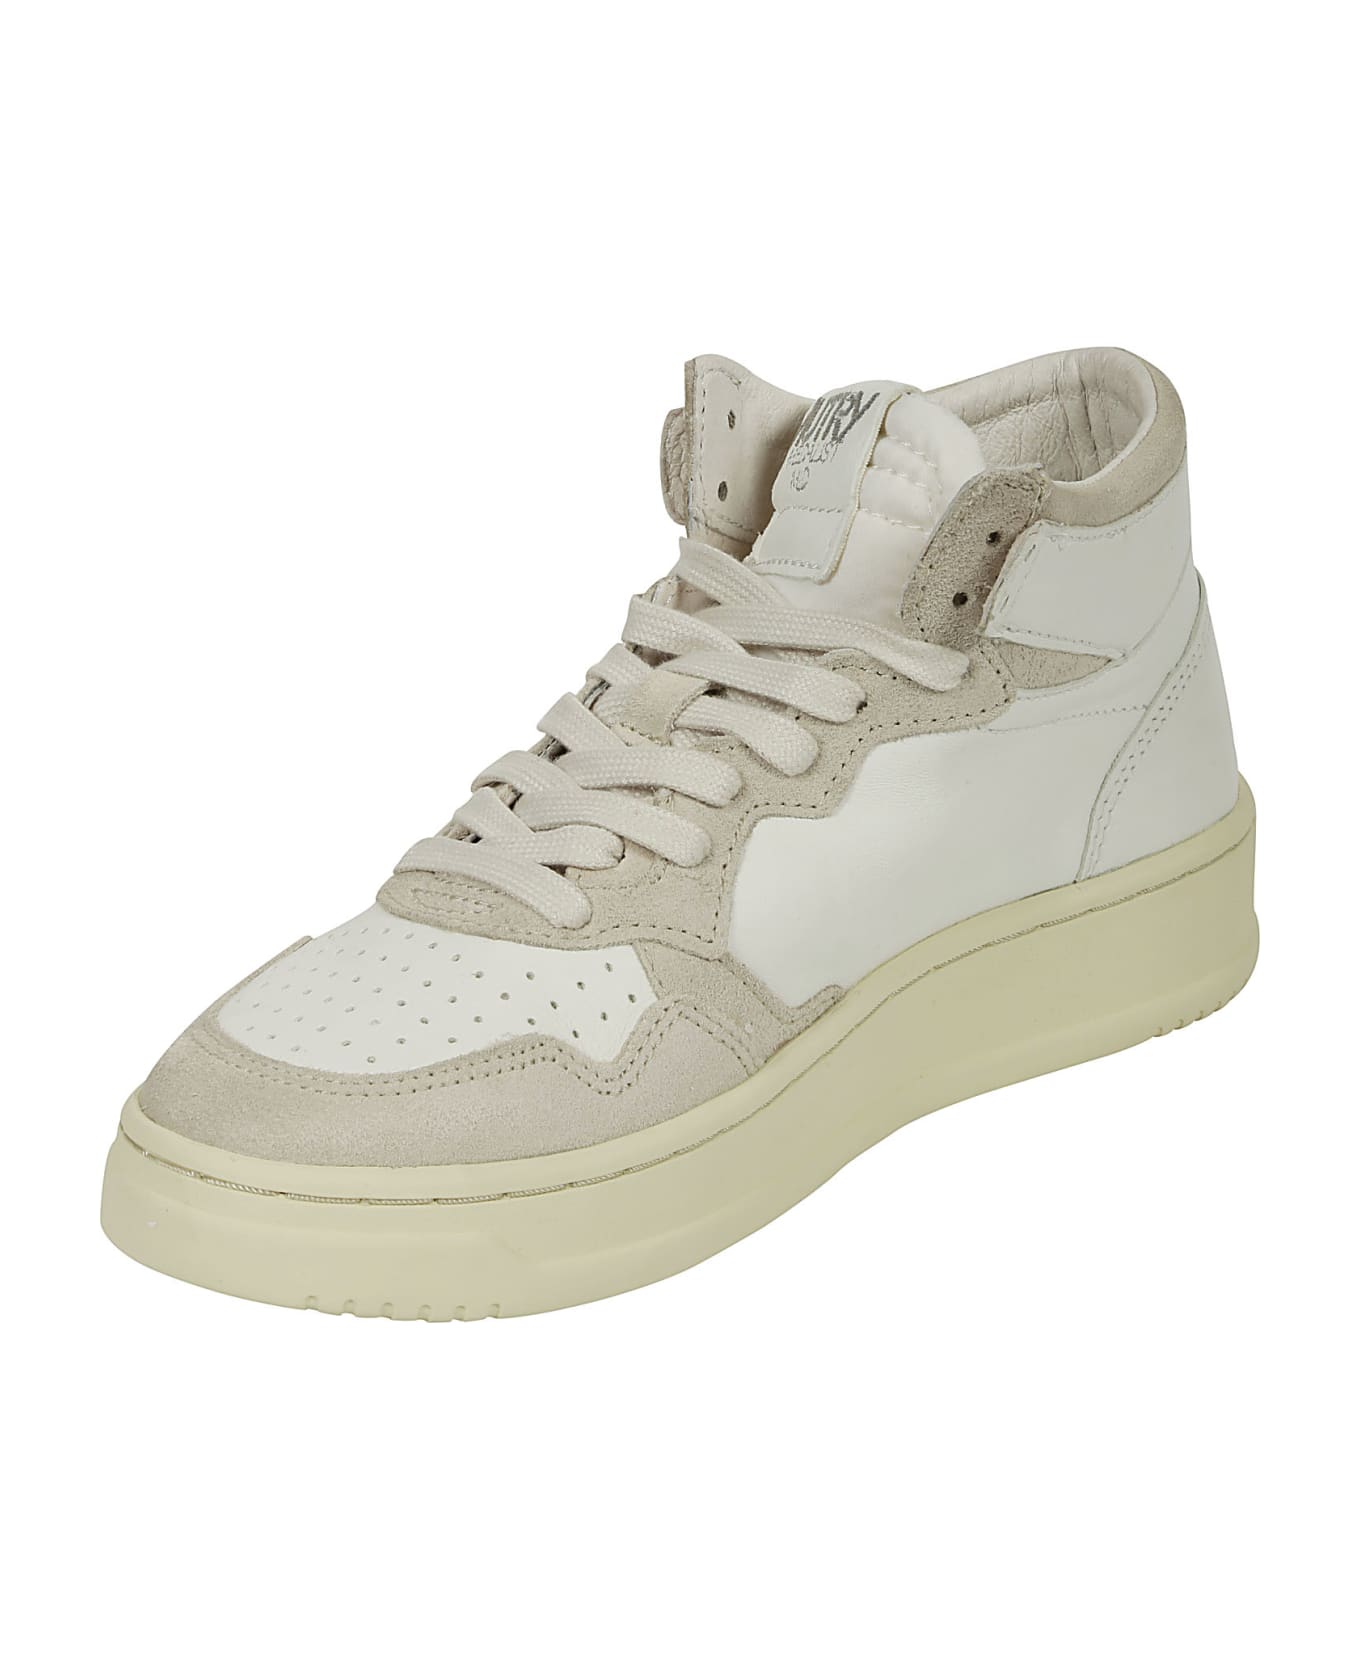 Autry 01 Mid Goat Suede - White